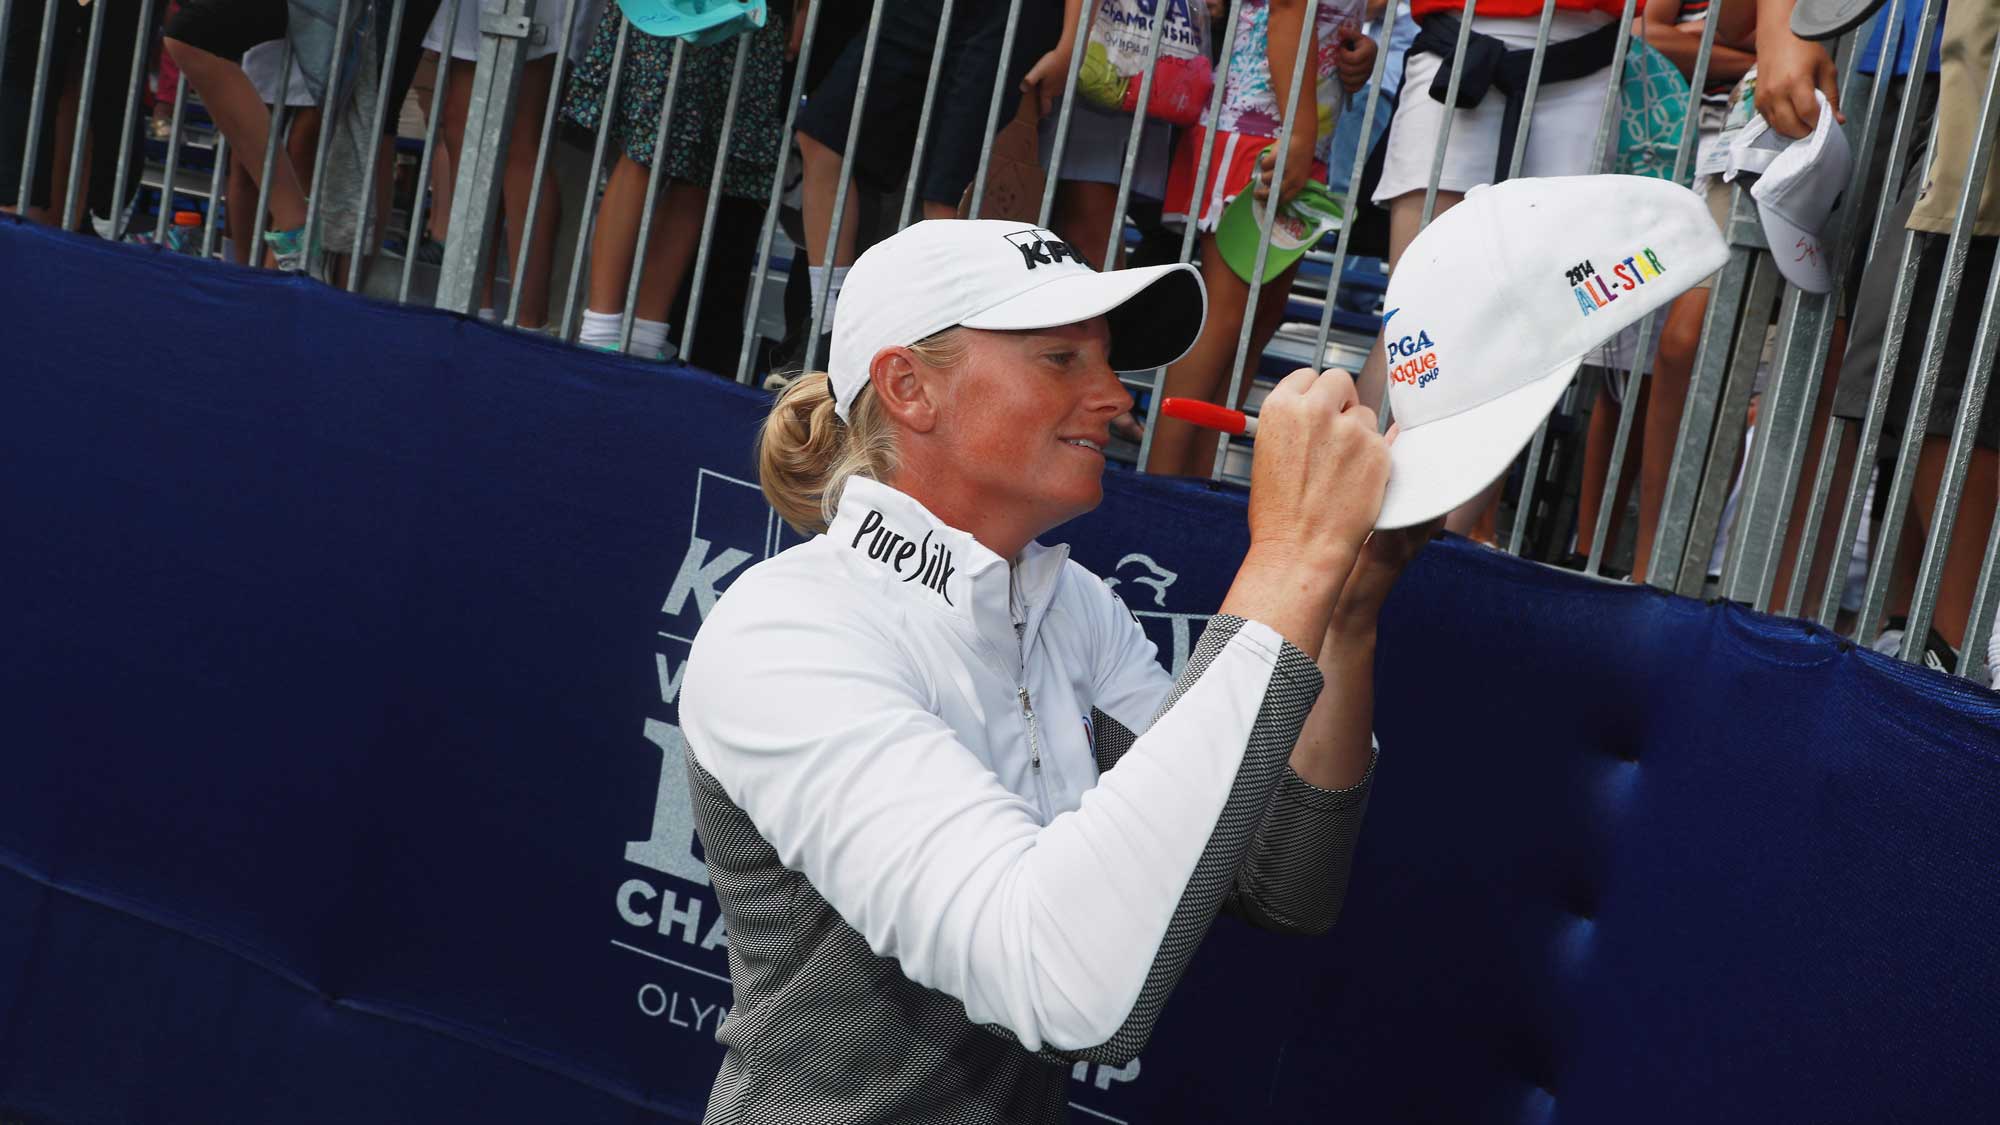 Stacy Lewis signs an autograph for a fan during a skills challenge prior to the start of the 2017 KPMG Women's PGA Championship